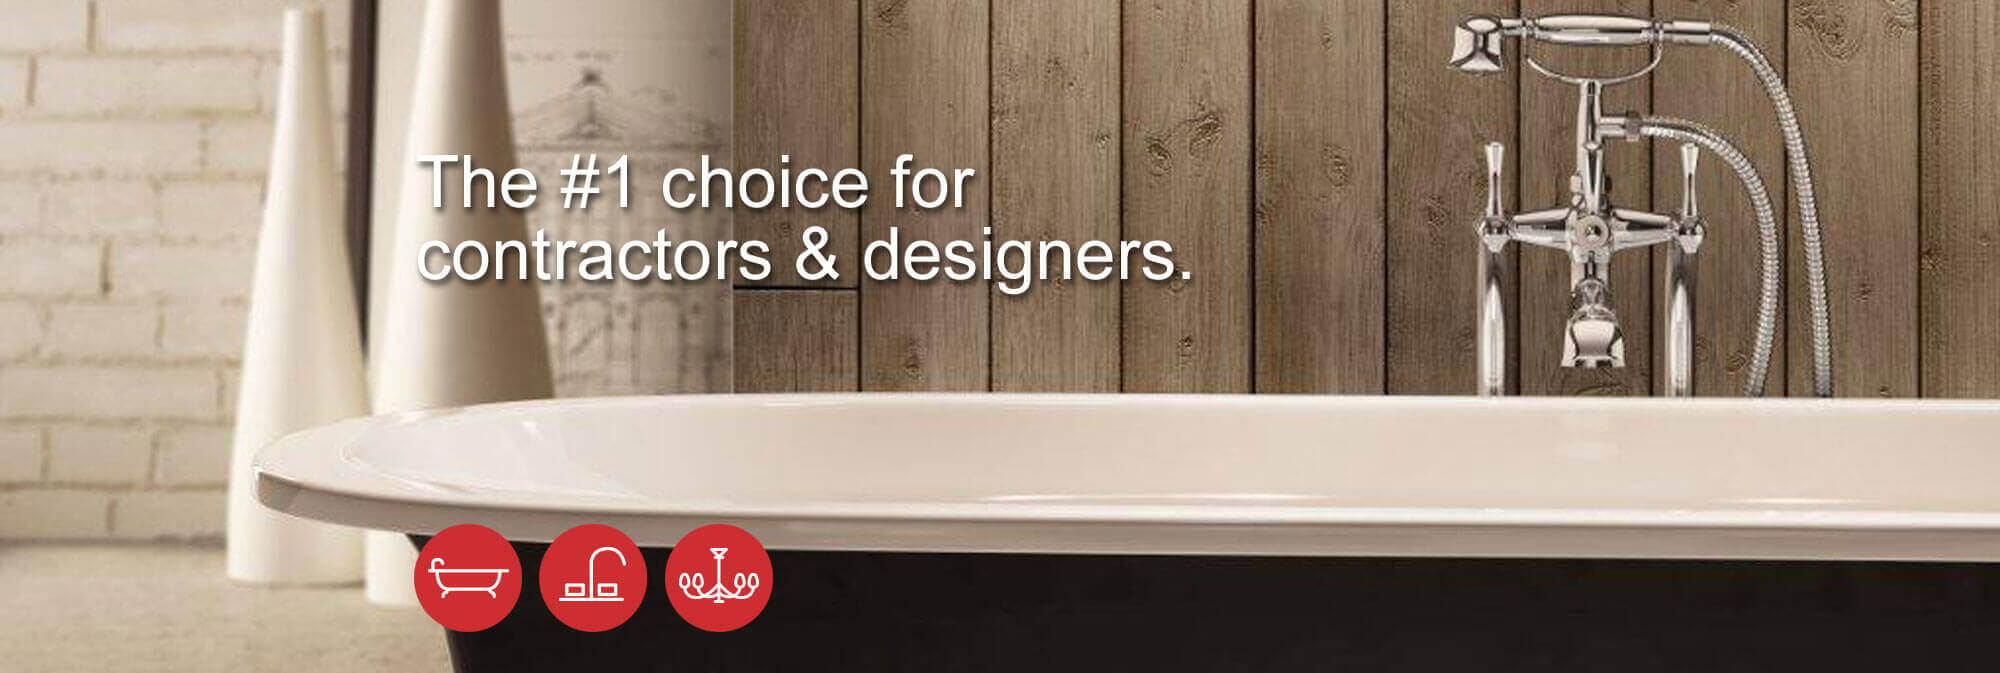 Kitchen and Bath is the number 1 choice for contractors and designers